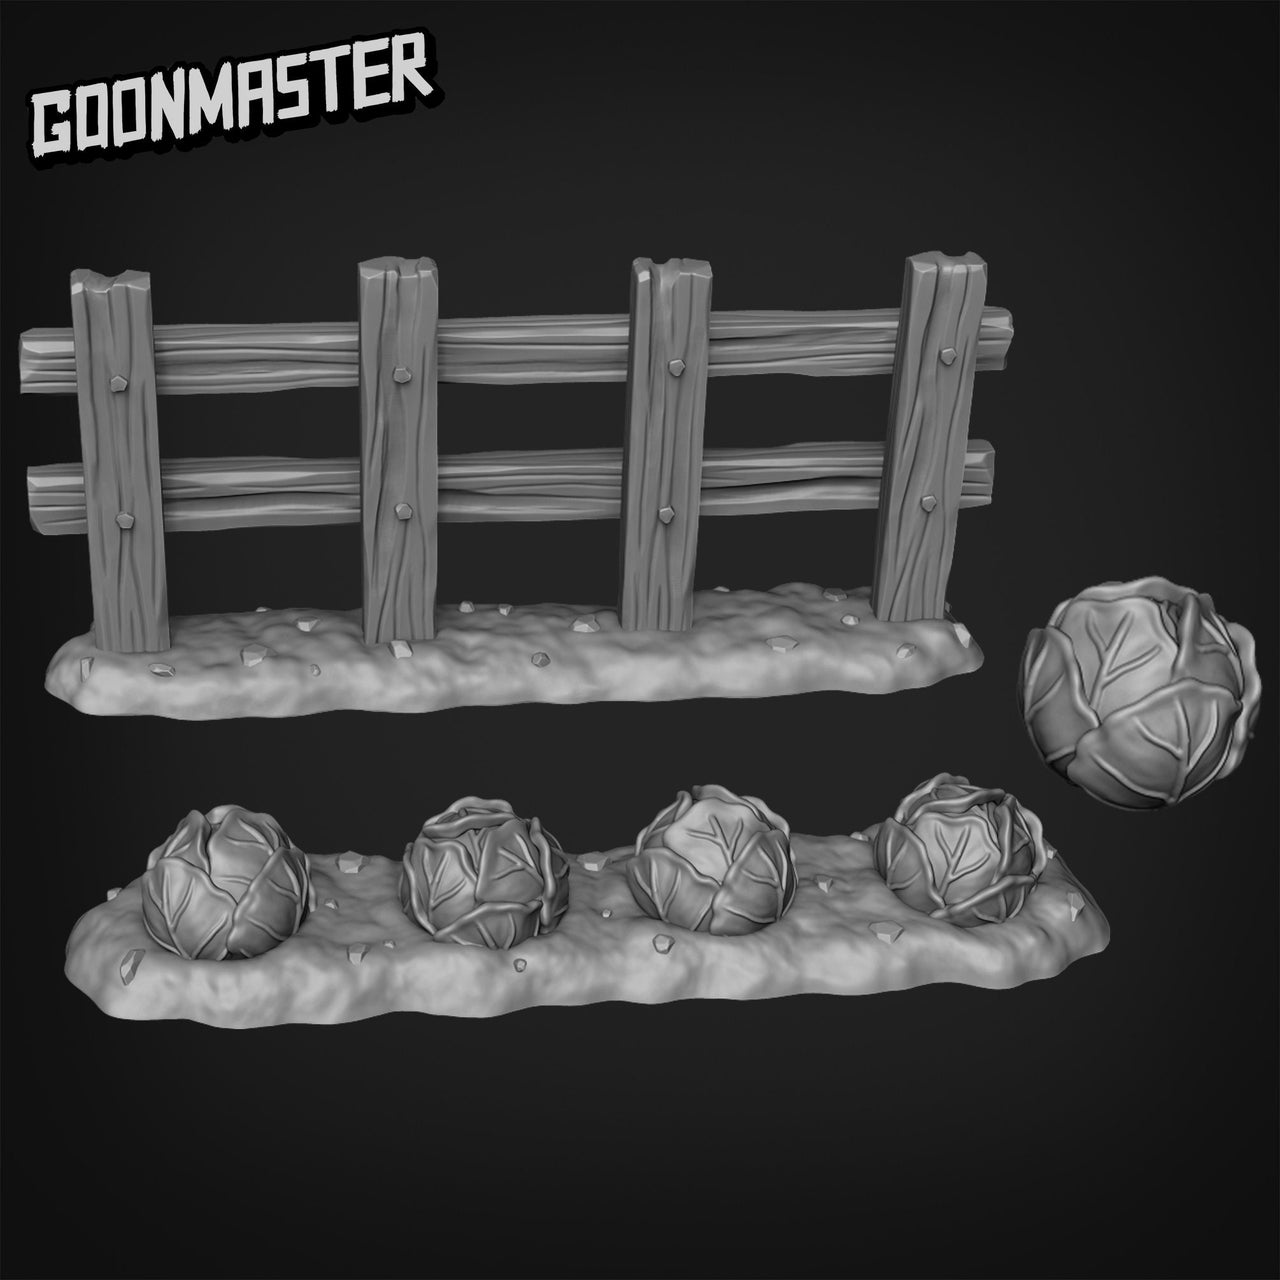 Fence and Cabbages, Garden Terrain - Goonmaster 